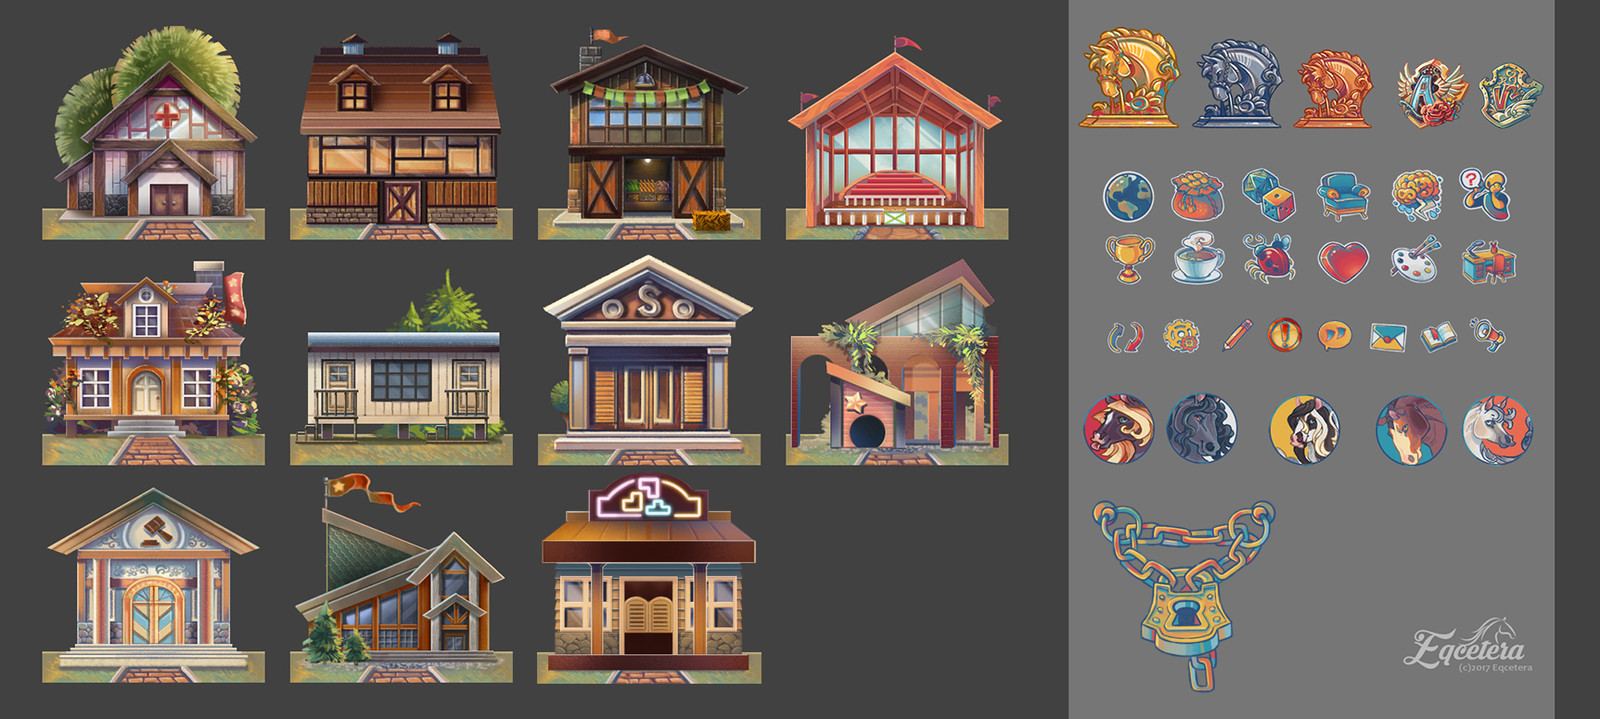 Icons for the interactive web game "Eqcetera"